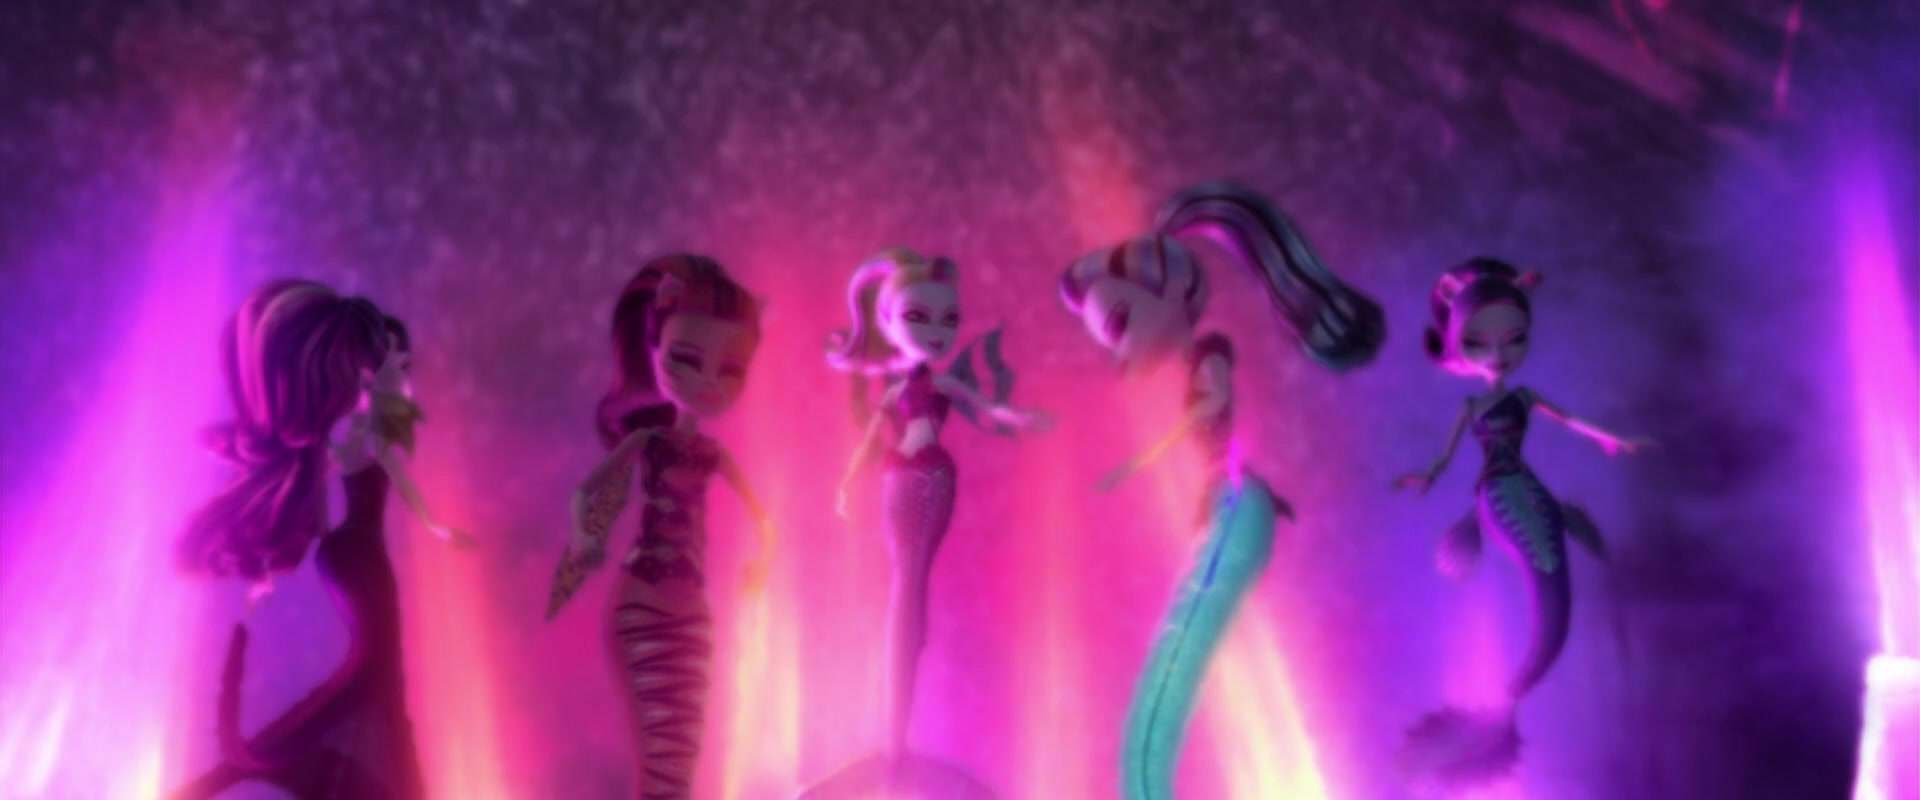 Monster High: Great Scarrier Reef background 1